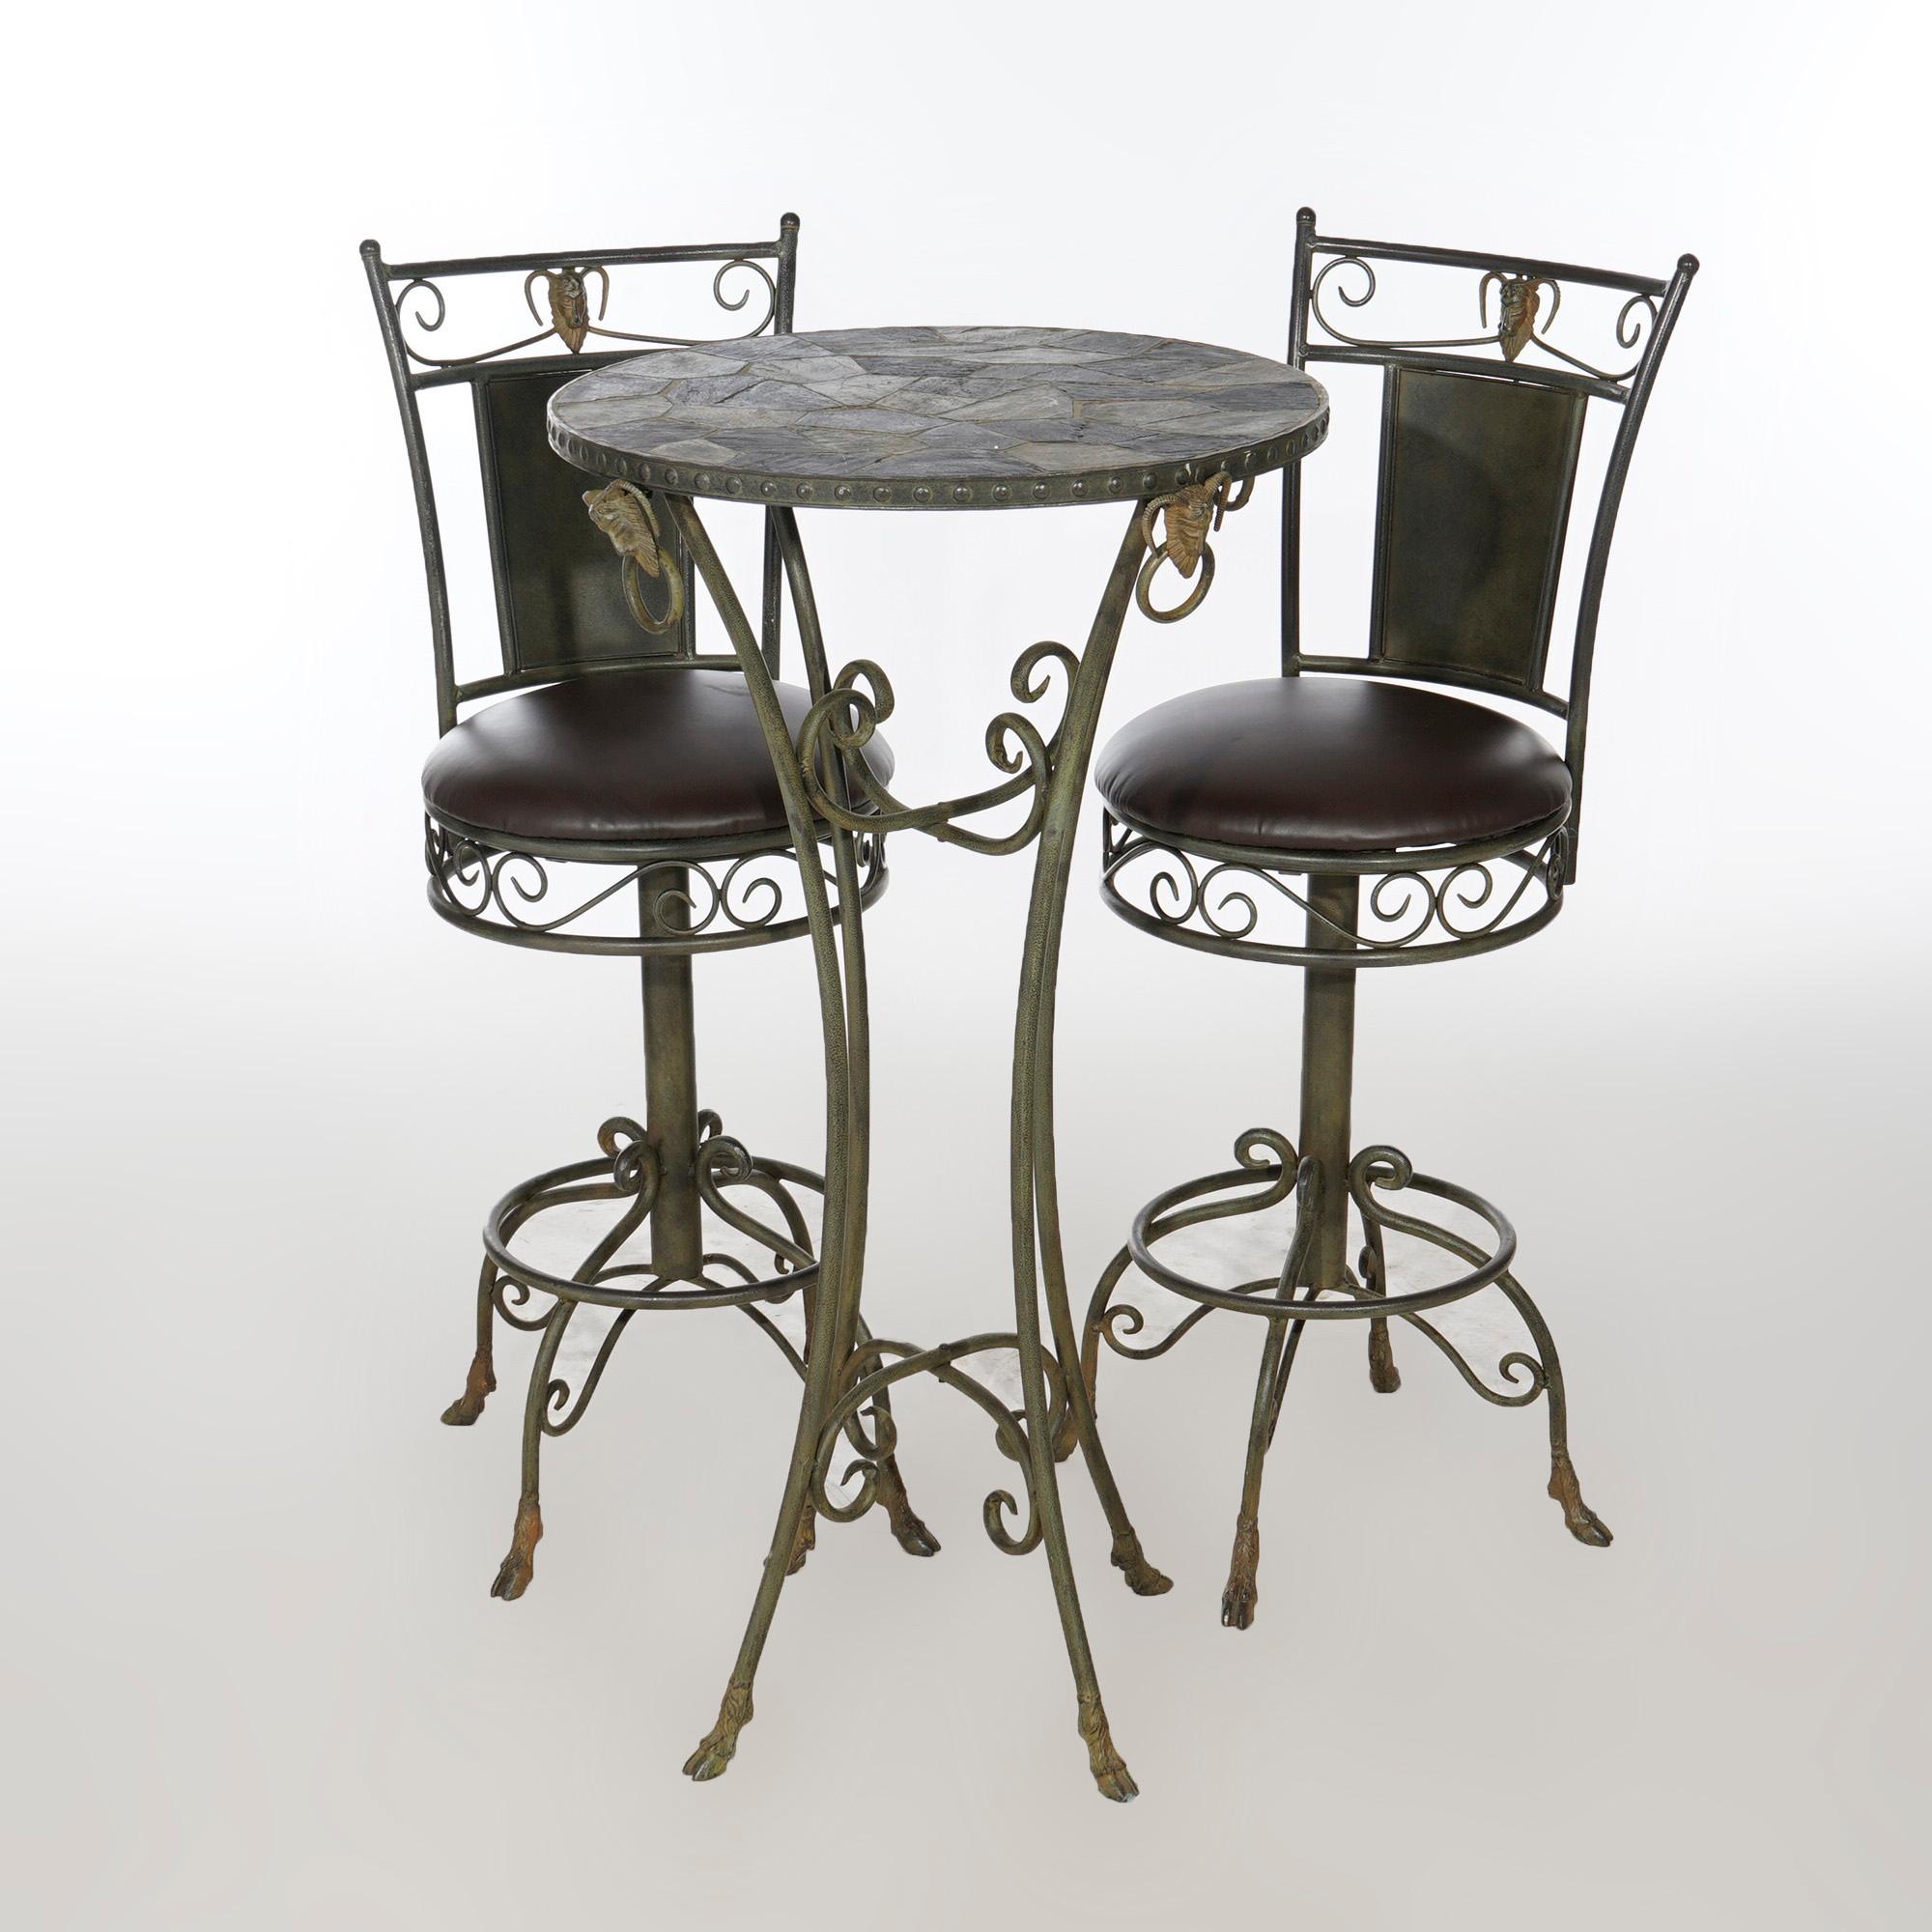 A pub set offers wrought iron frame having satyr heads, scroll elements and hoof feet; includes slate top table and two swivel chairs, 20th century

Measures- Table 43.5''H x 25''W x 25''D; Chairs 45.25''H x 16''W x 18.5''D, 28.5'' seat height